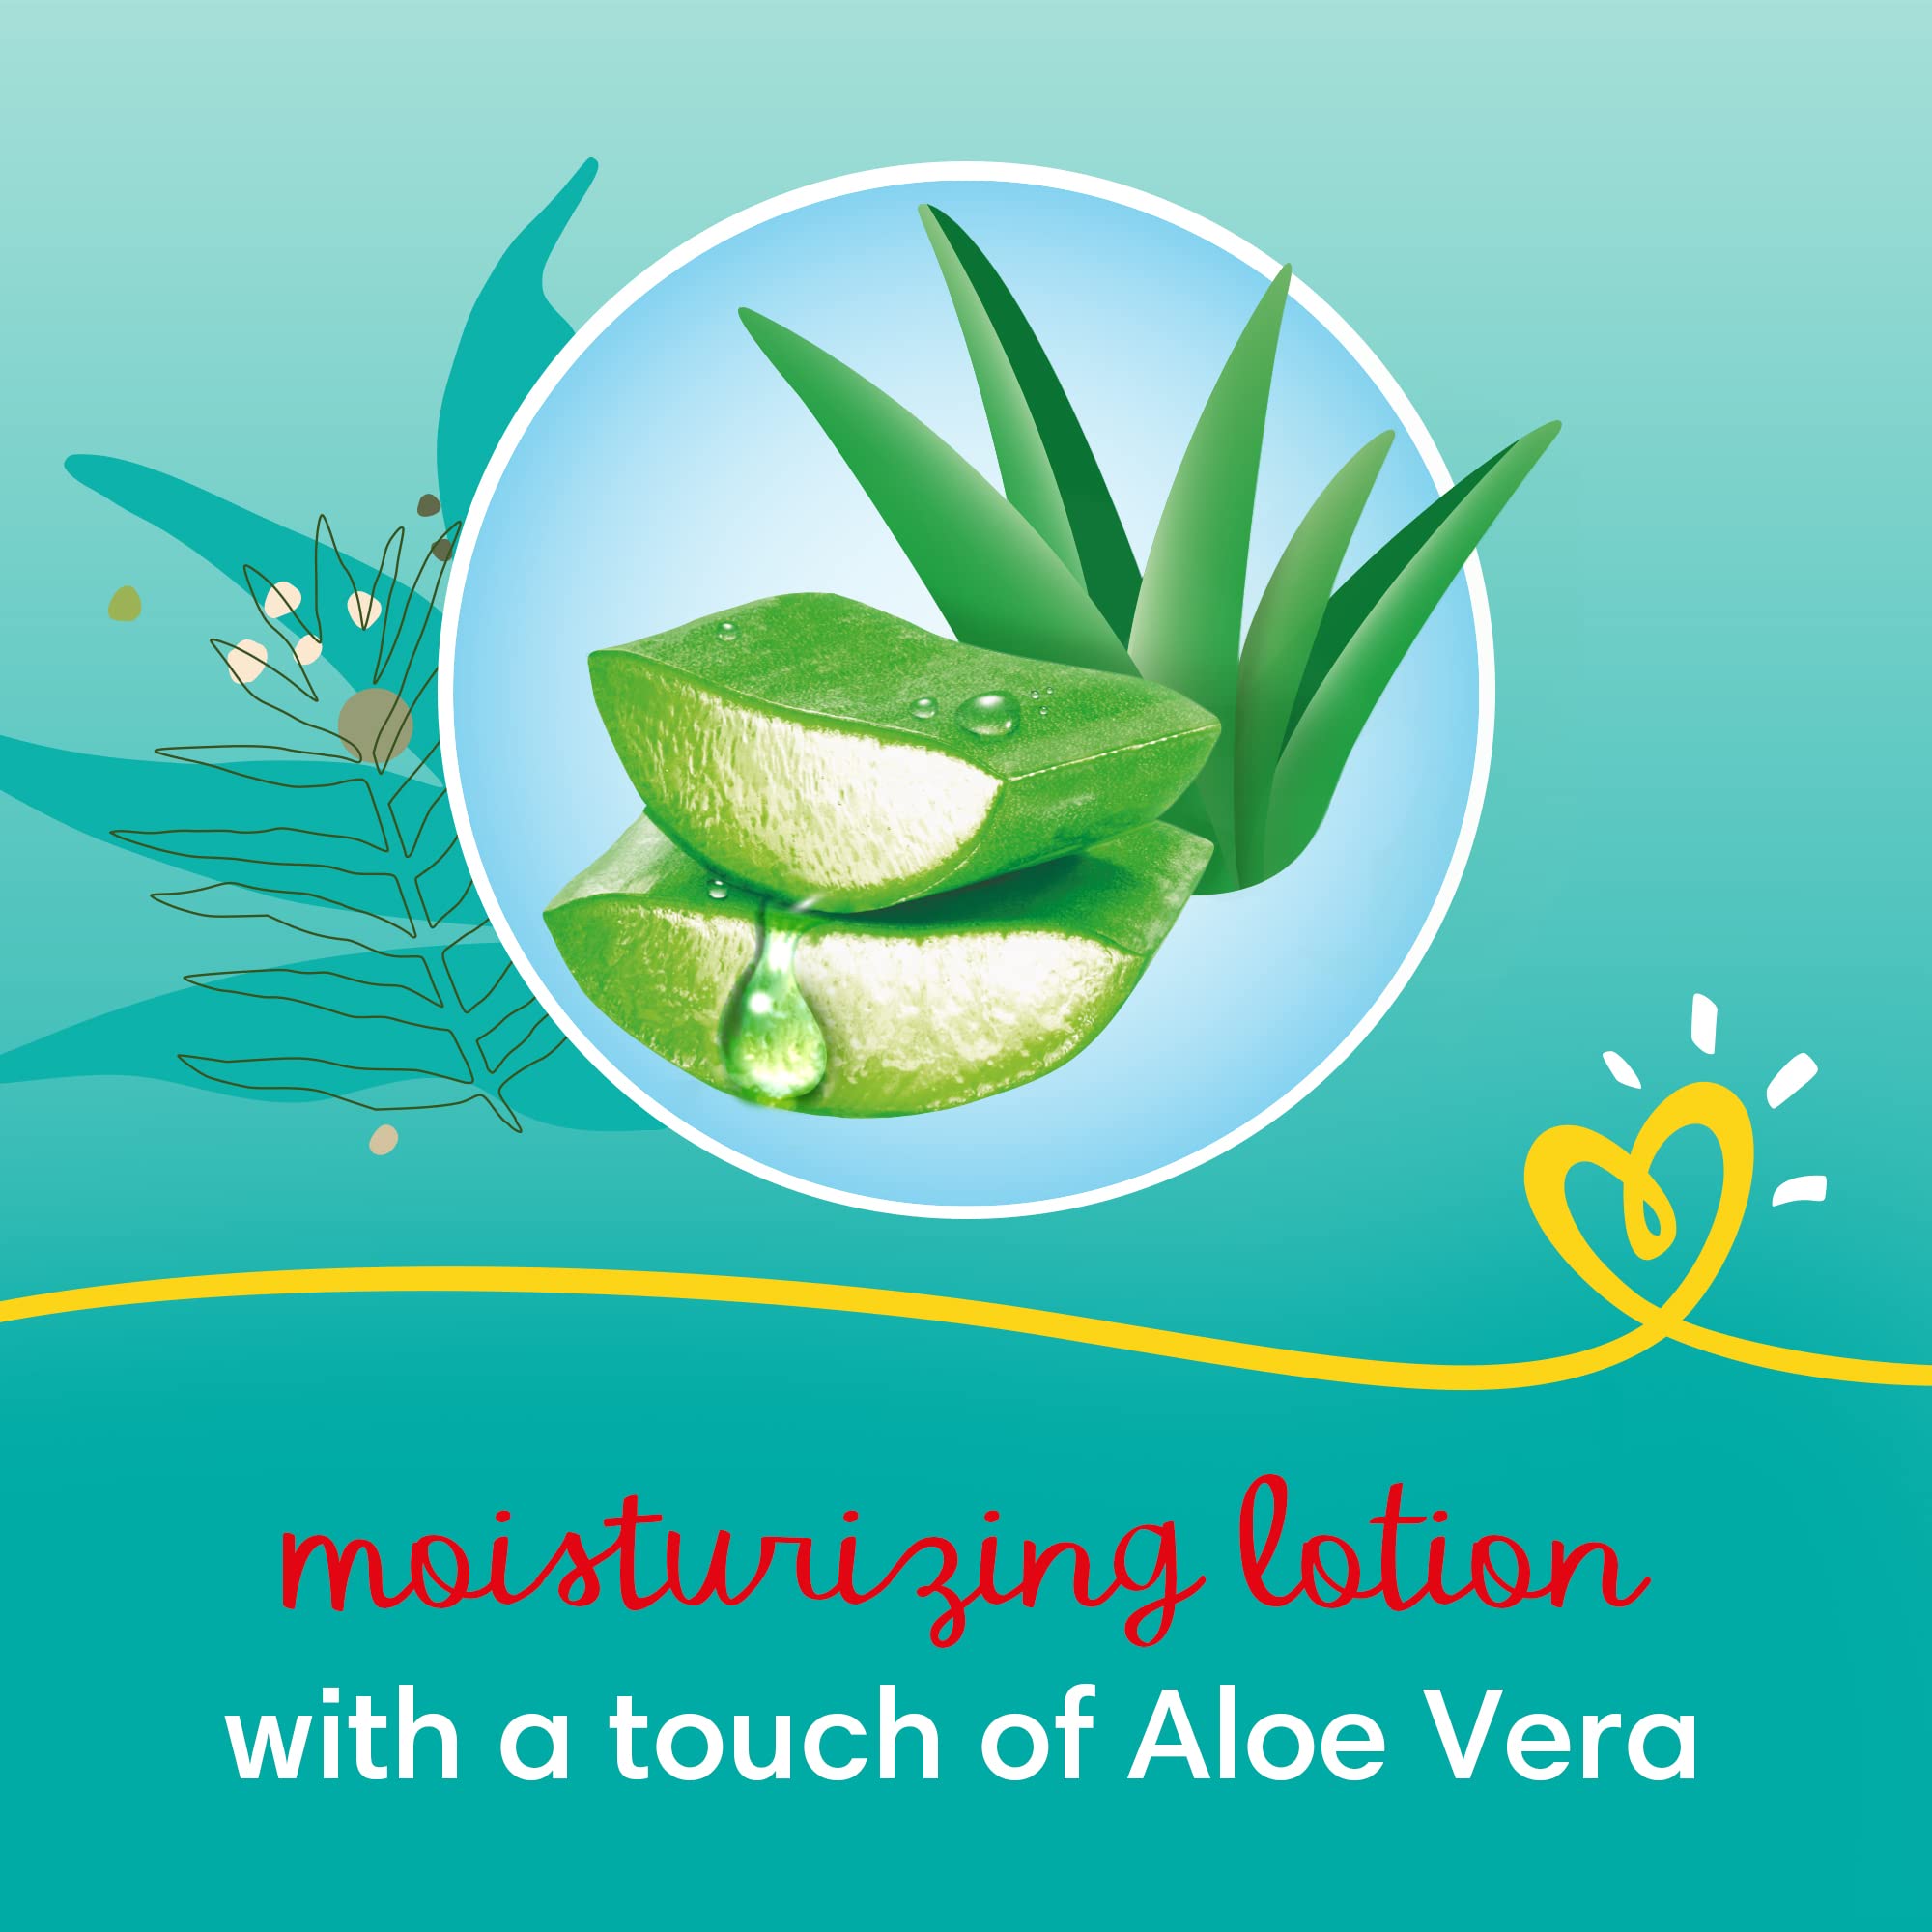 Pampers Baby-Dry Pants with Aloe Vera Lotion, Stretchy Sides, and Leakage Protection, Size 3, 6-11 kg, Mega Pack, 76 Pants  حفاضات بامبرز بانتي، مقاس 3، ميدي، 6-11 كغم، عبوة كبيرة، 76 حفاض